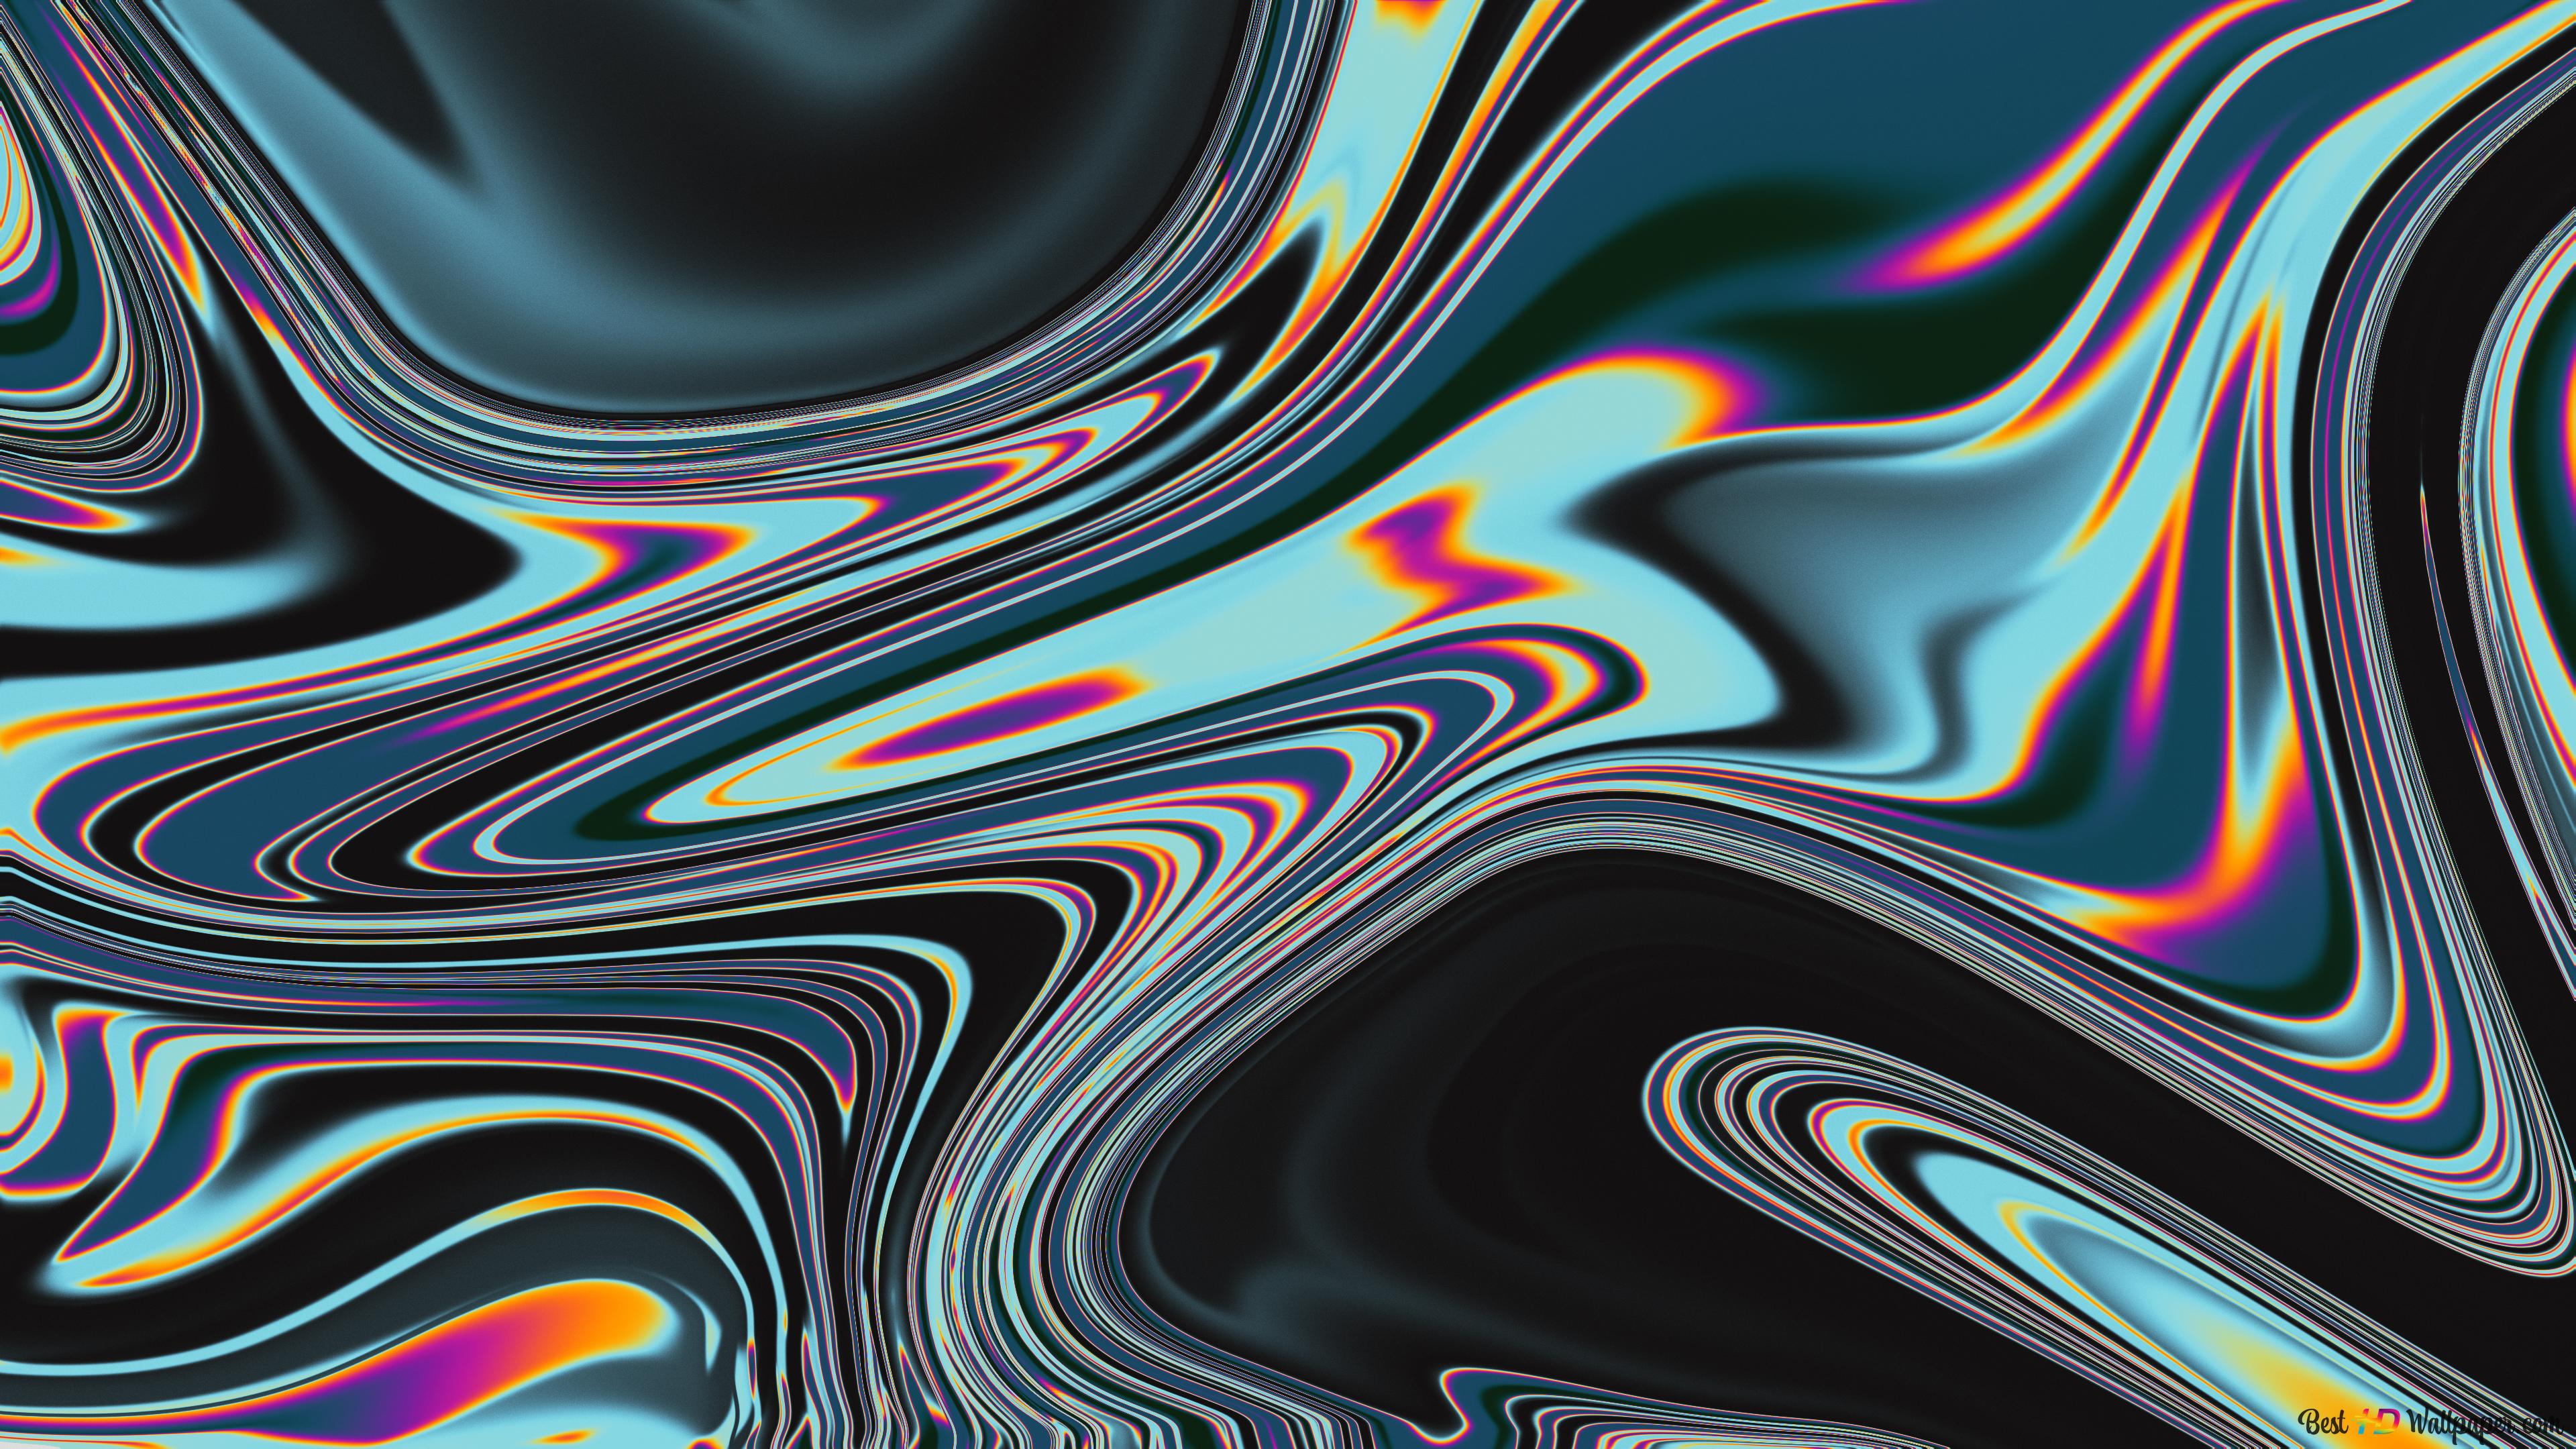 3840x2160 Hintergrundbild 3840x2160. Digital art, abstract, colorful, liquid, modern covers psychedelic background aesthetic 4K wallpaper download